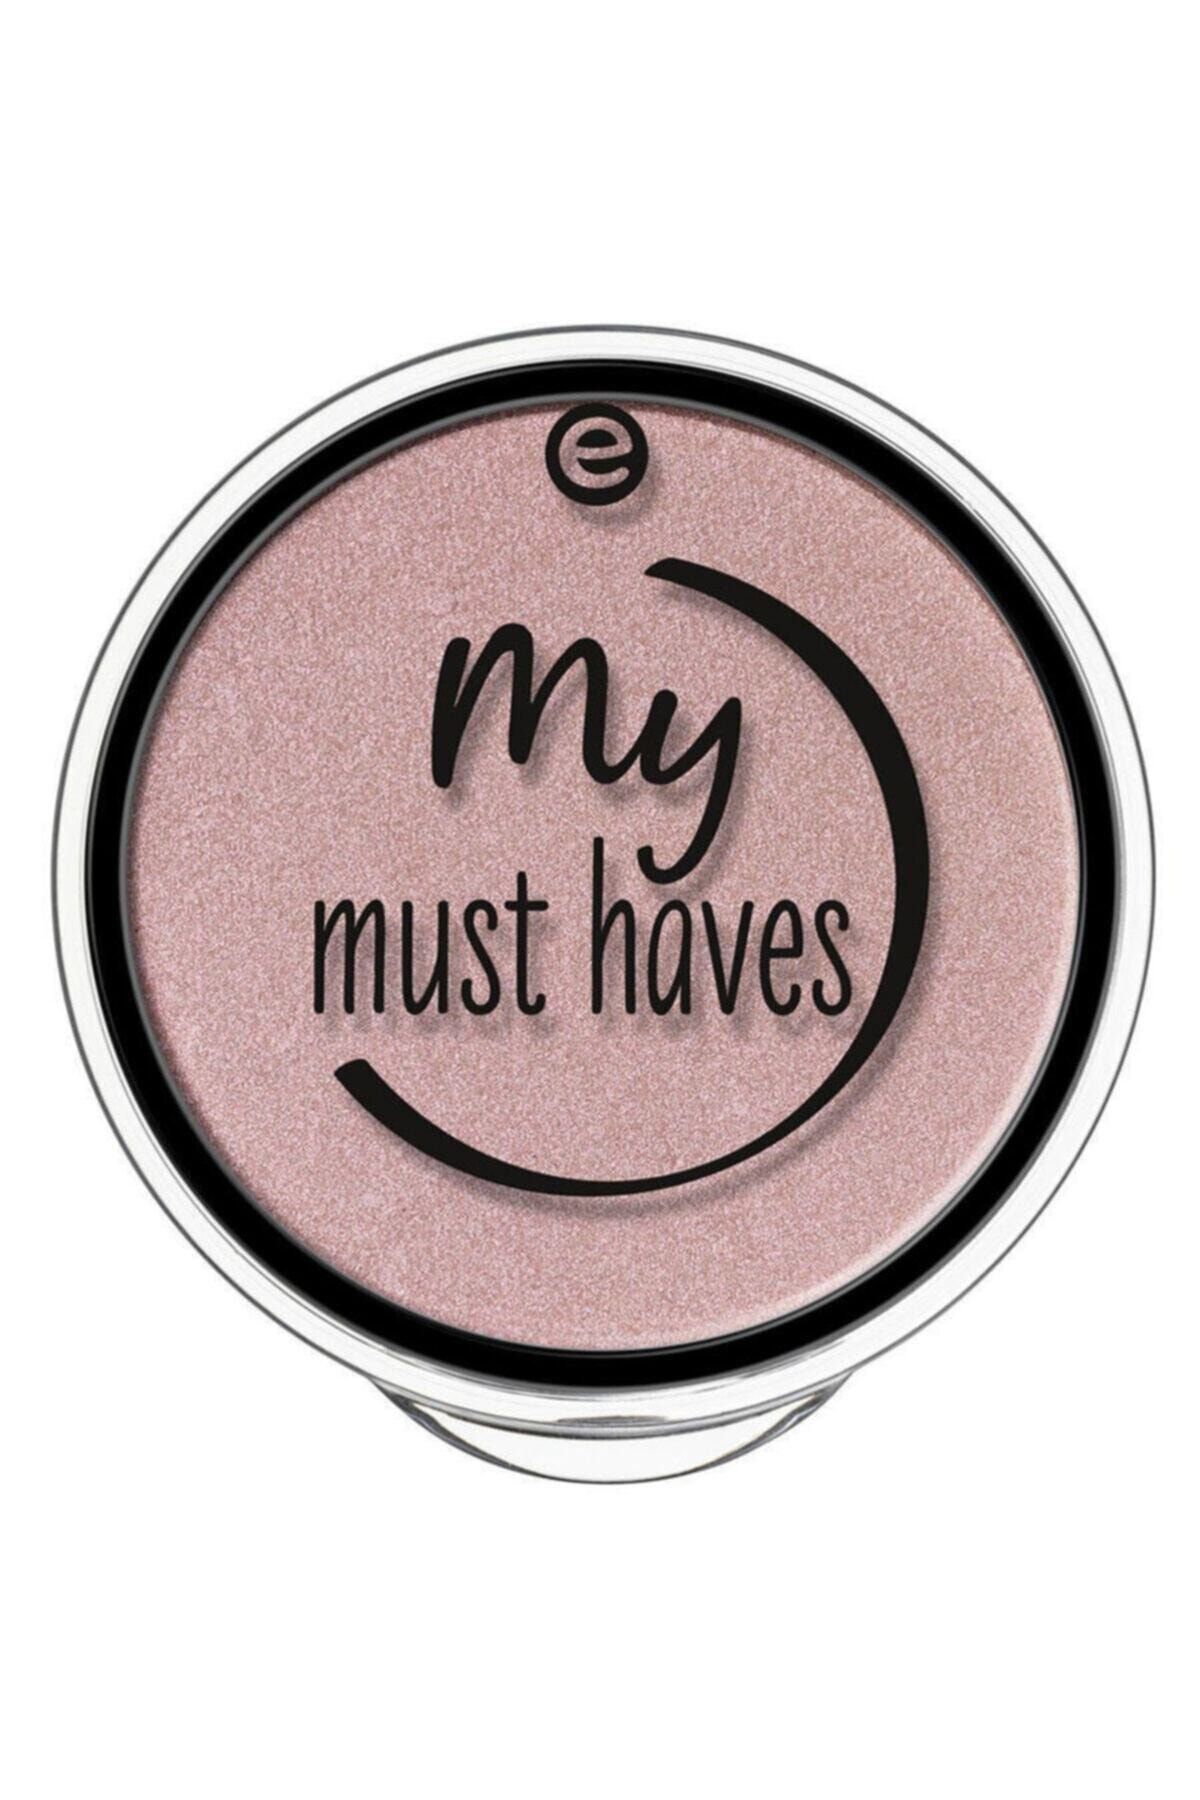 Essence Toz Pudra - My Must Haves Holo Powder 2 2 g 4059729037596